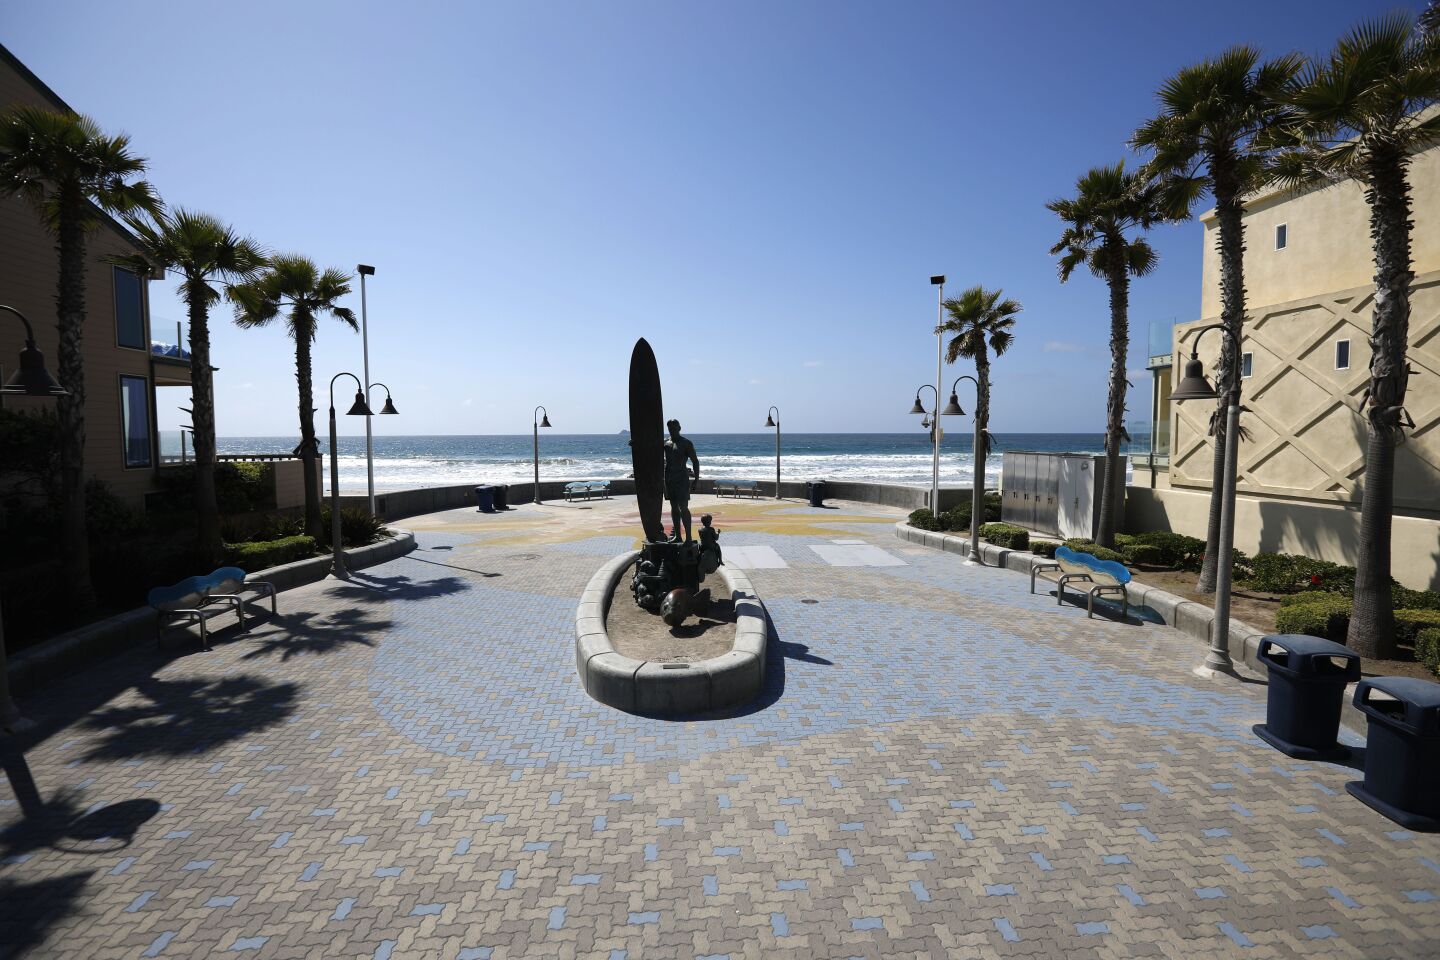 The Spirit of Imperial Beach Statue stands alone during a shutdown of beaches due to the coronavirus on March 29, 2020.